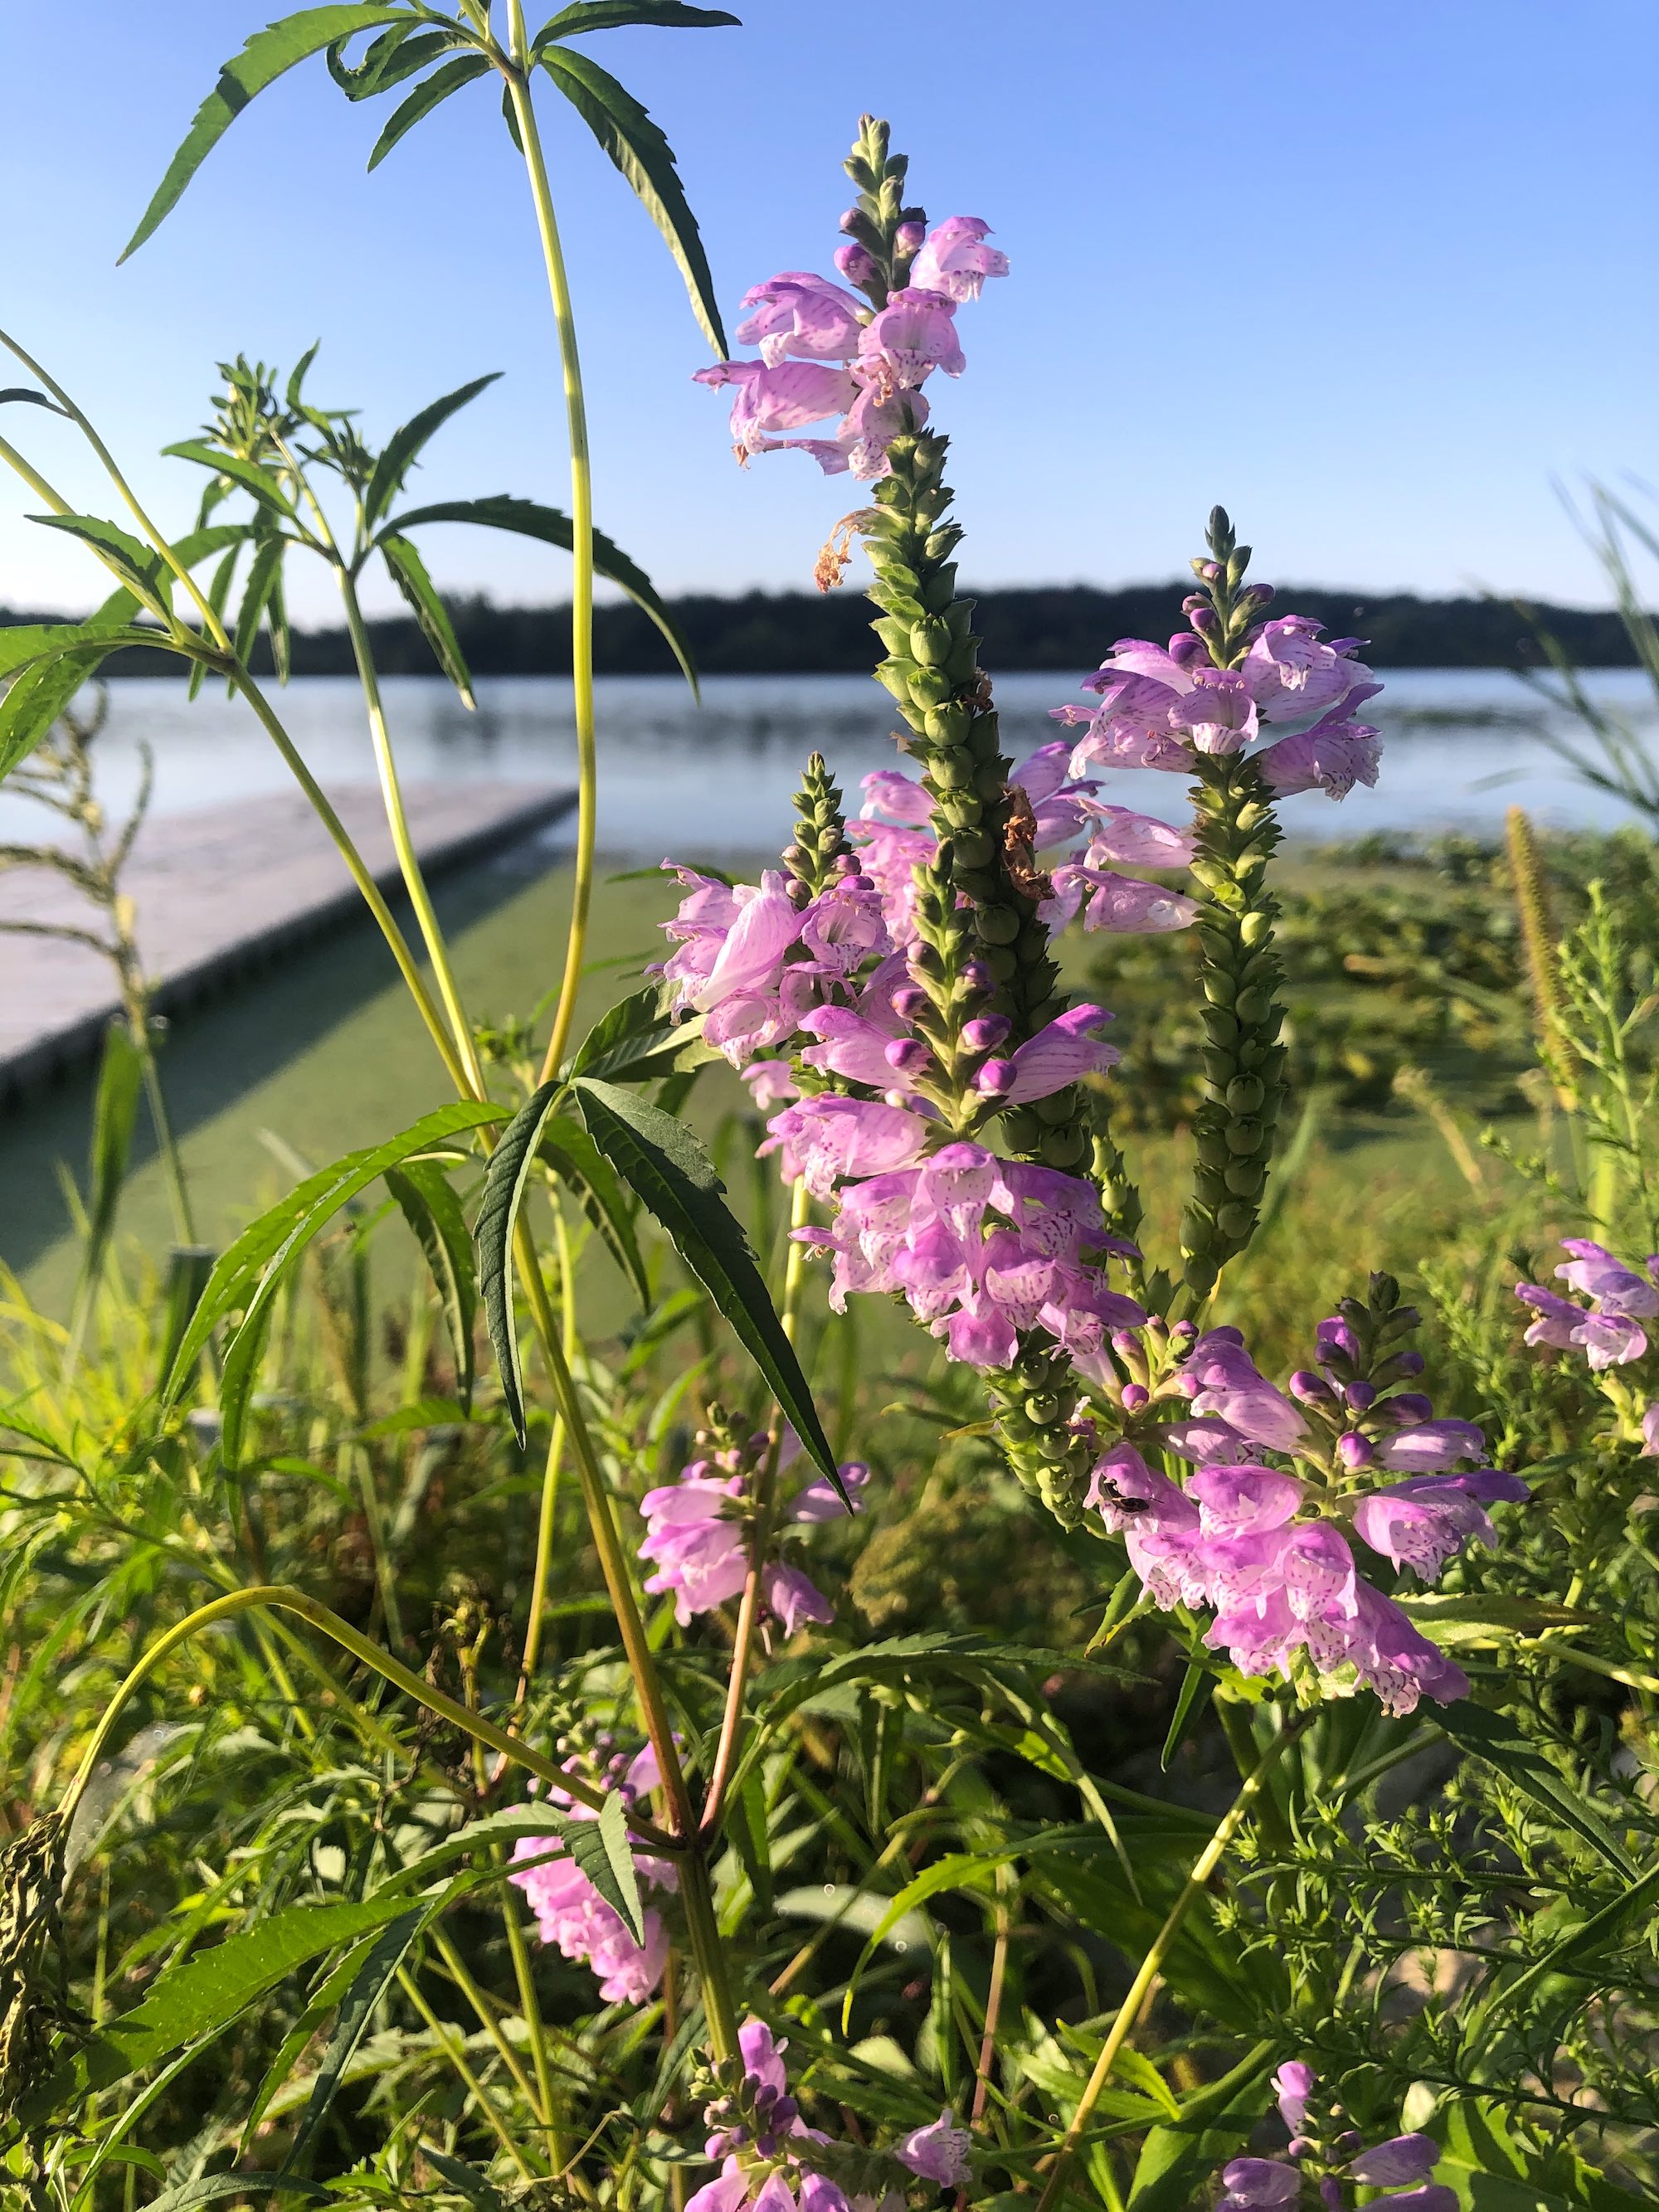 Obedient Plant on shore of Lake Wingra in Wingra Park in Madison, Wisconsin on August 21, 2020.